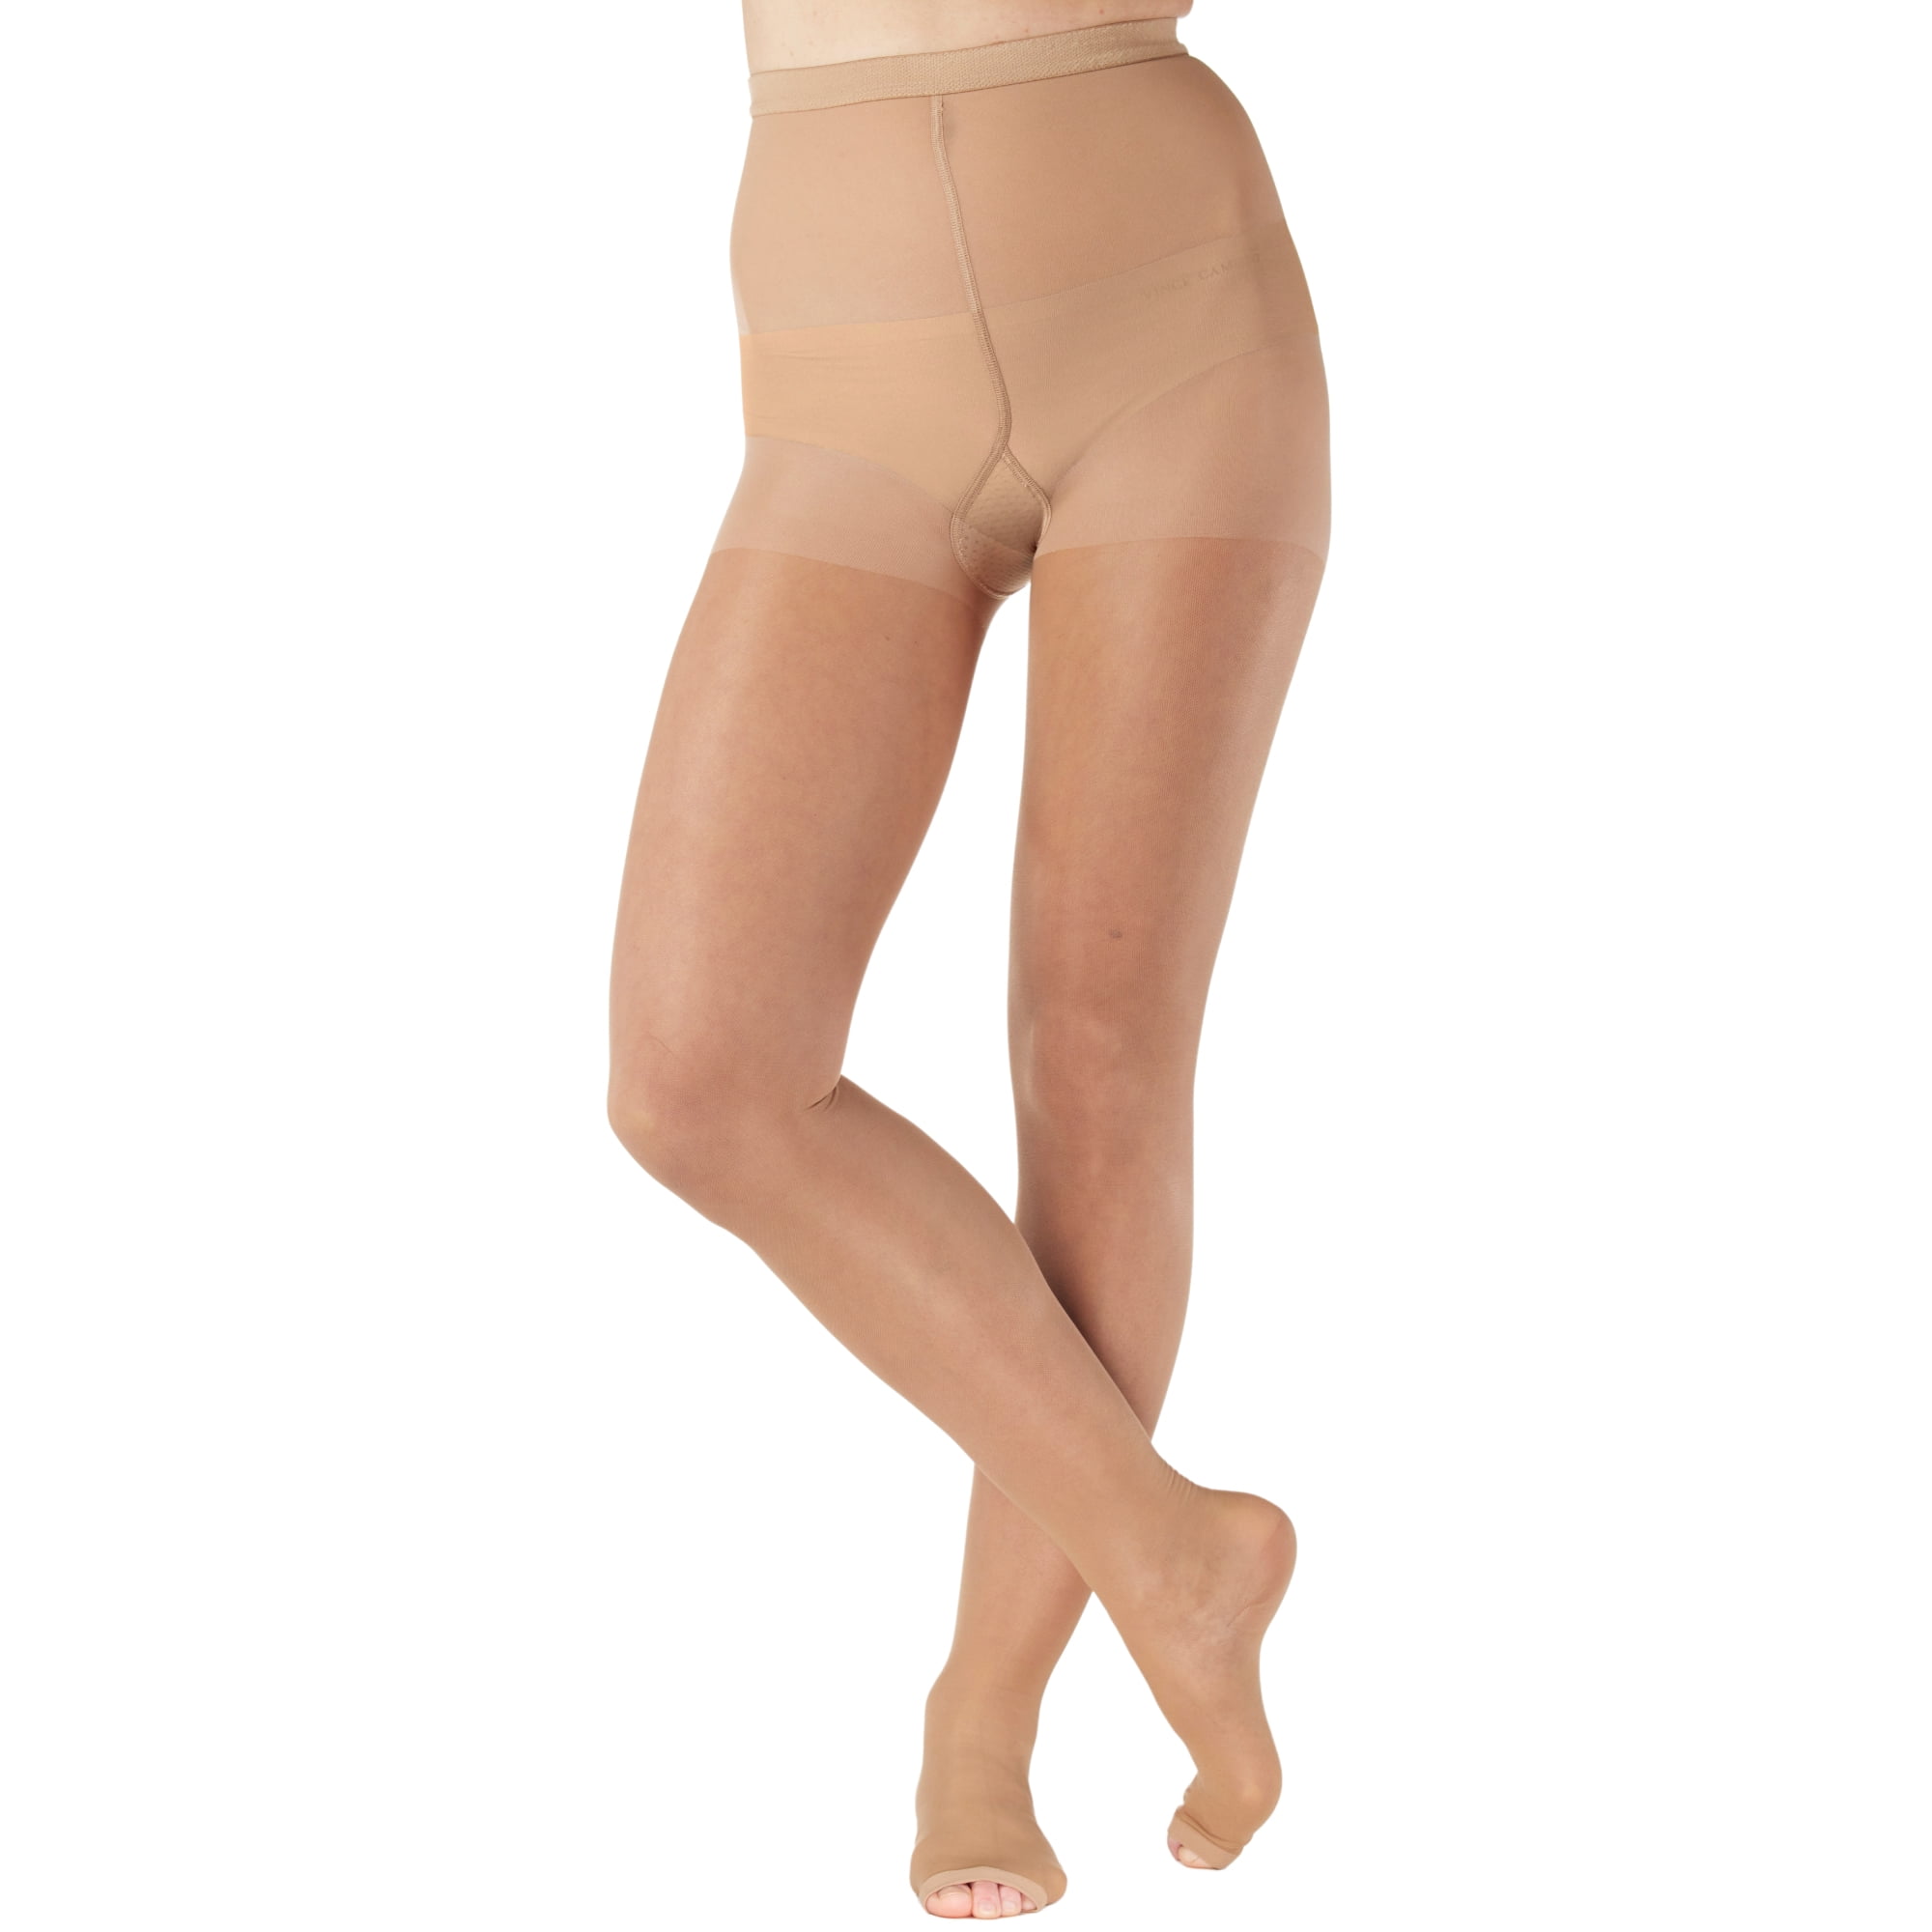 Extra Wide Womens Compression Tights for Swelling 20-30mmHg